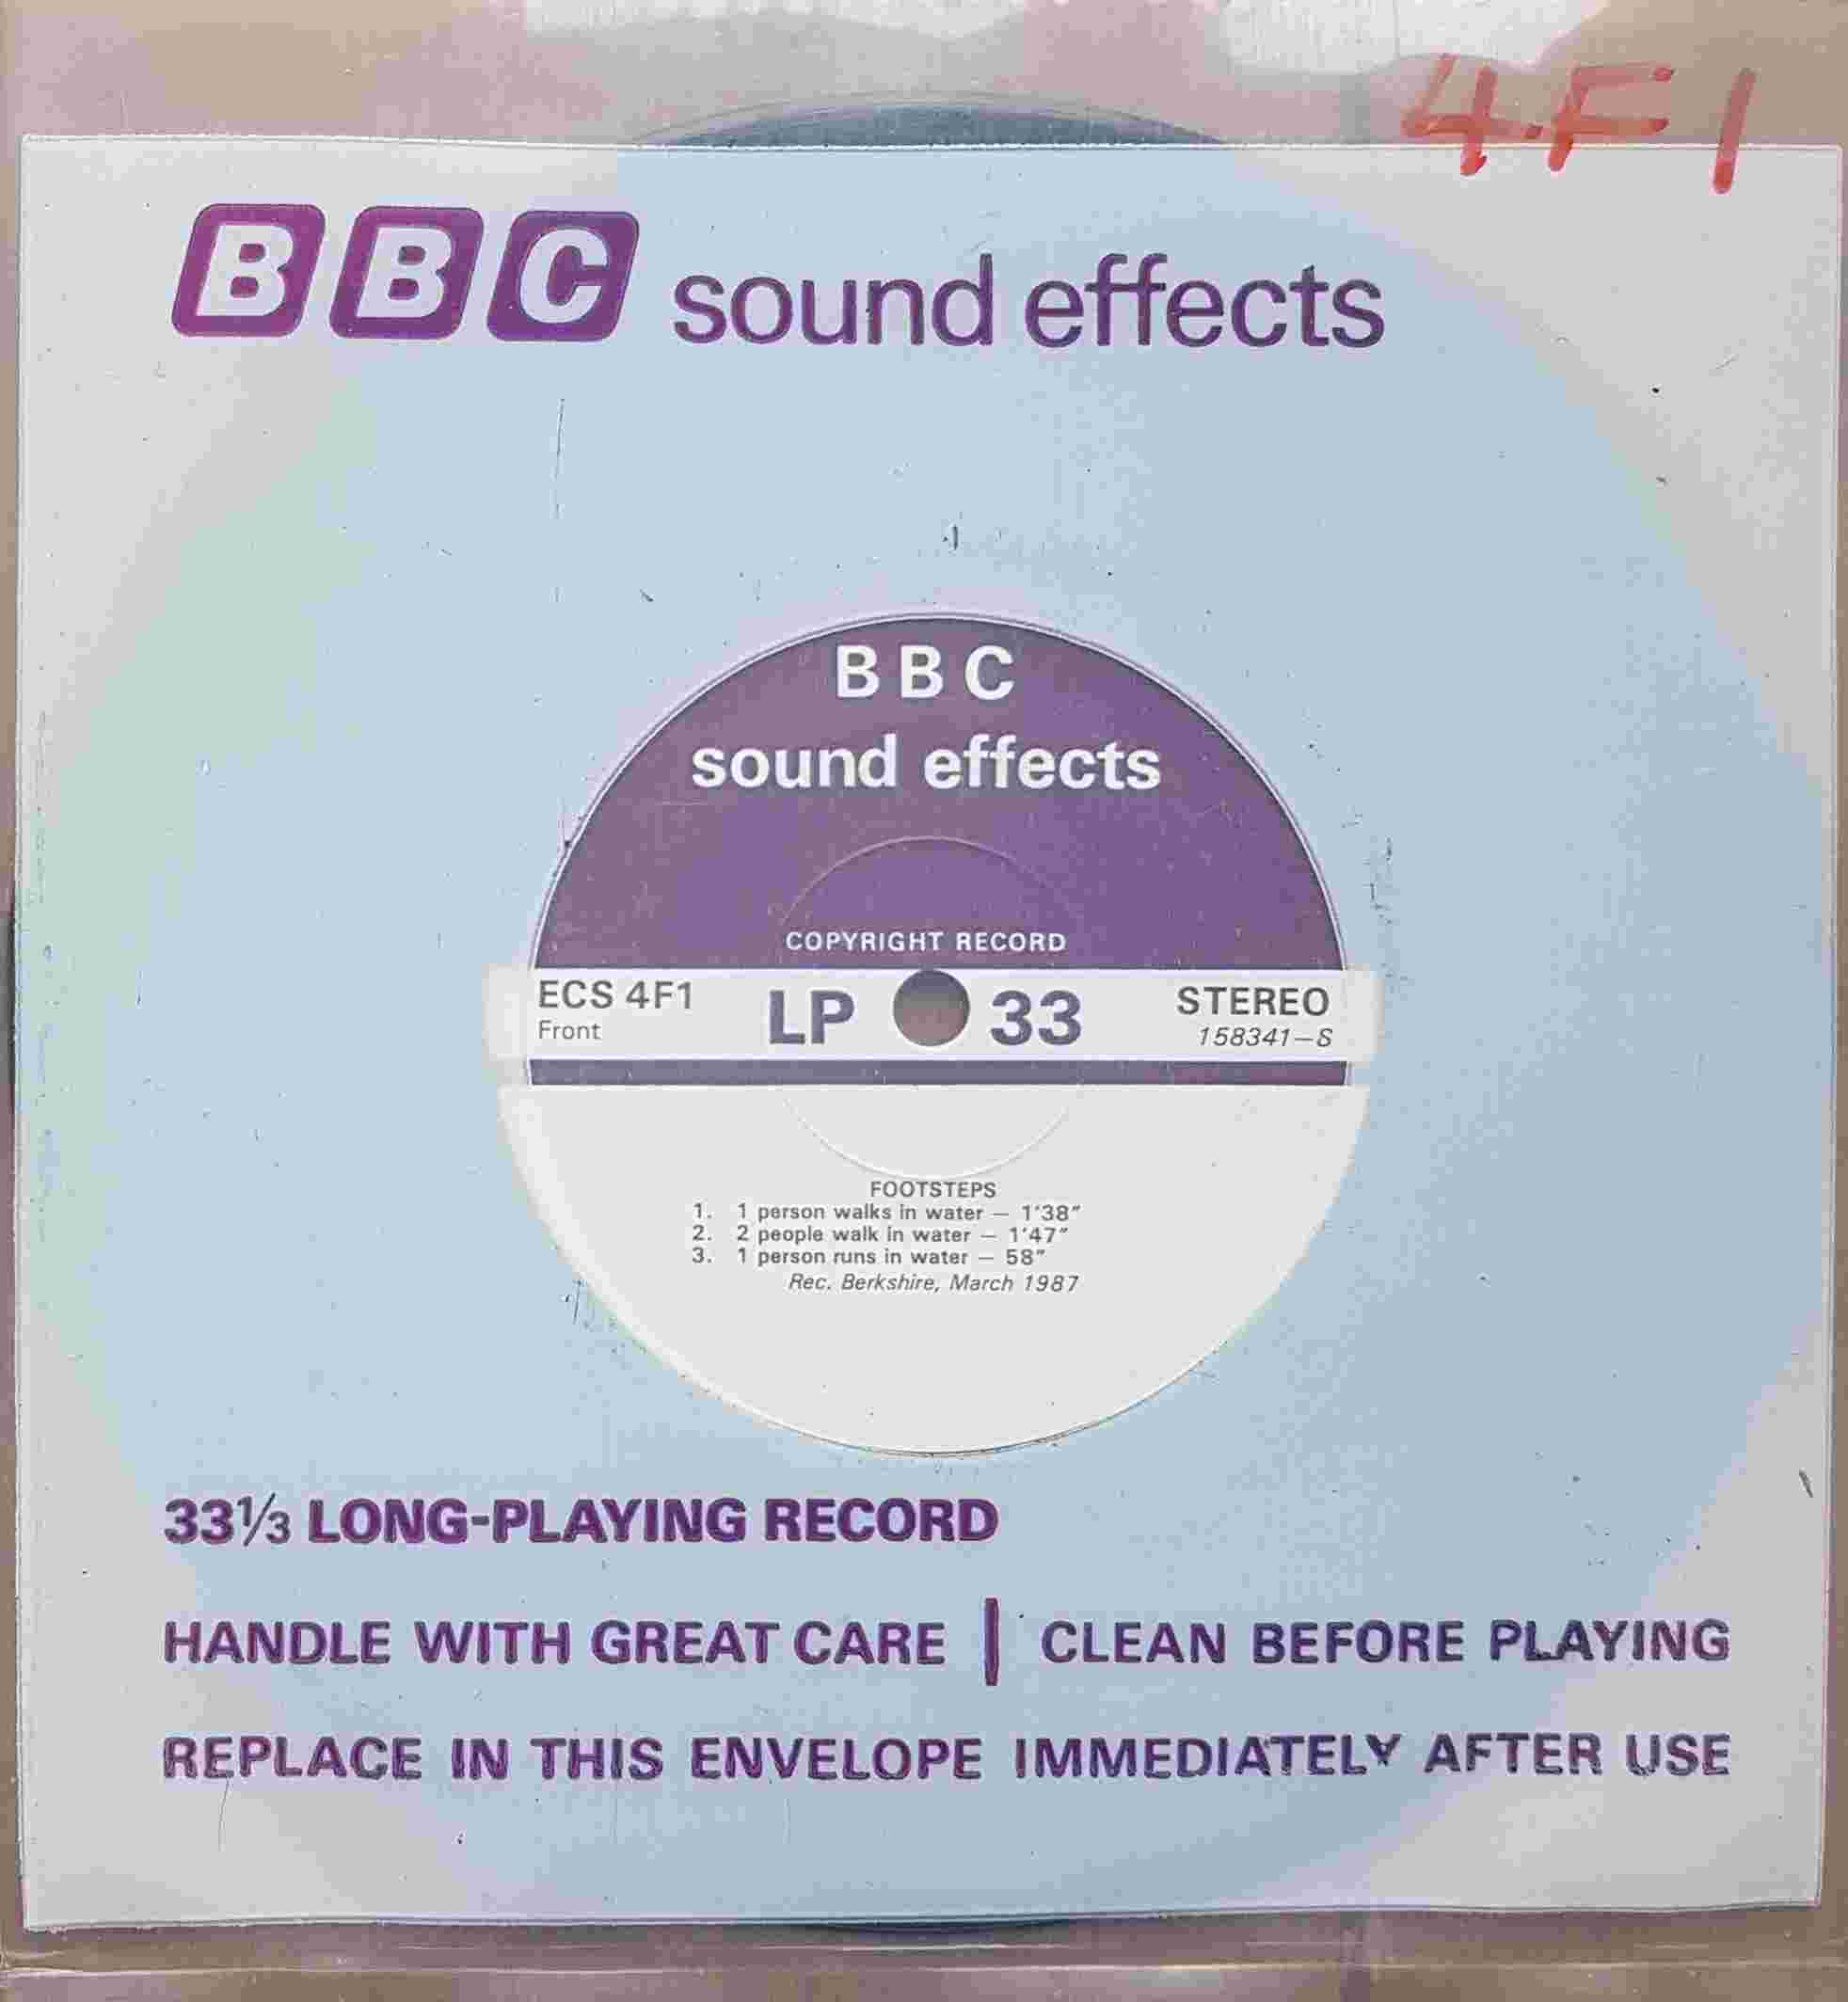 Picture of ECS 4F1 Footsteps by artist Not registered from the BBC singles - Records and Tapes library